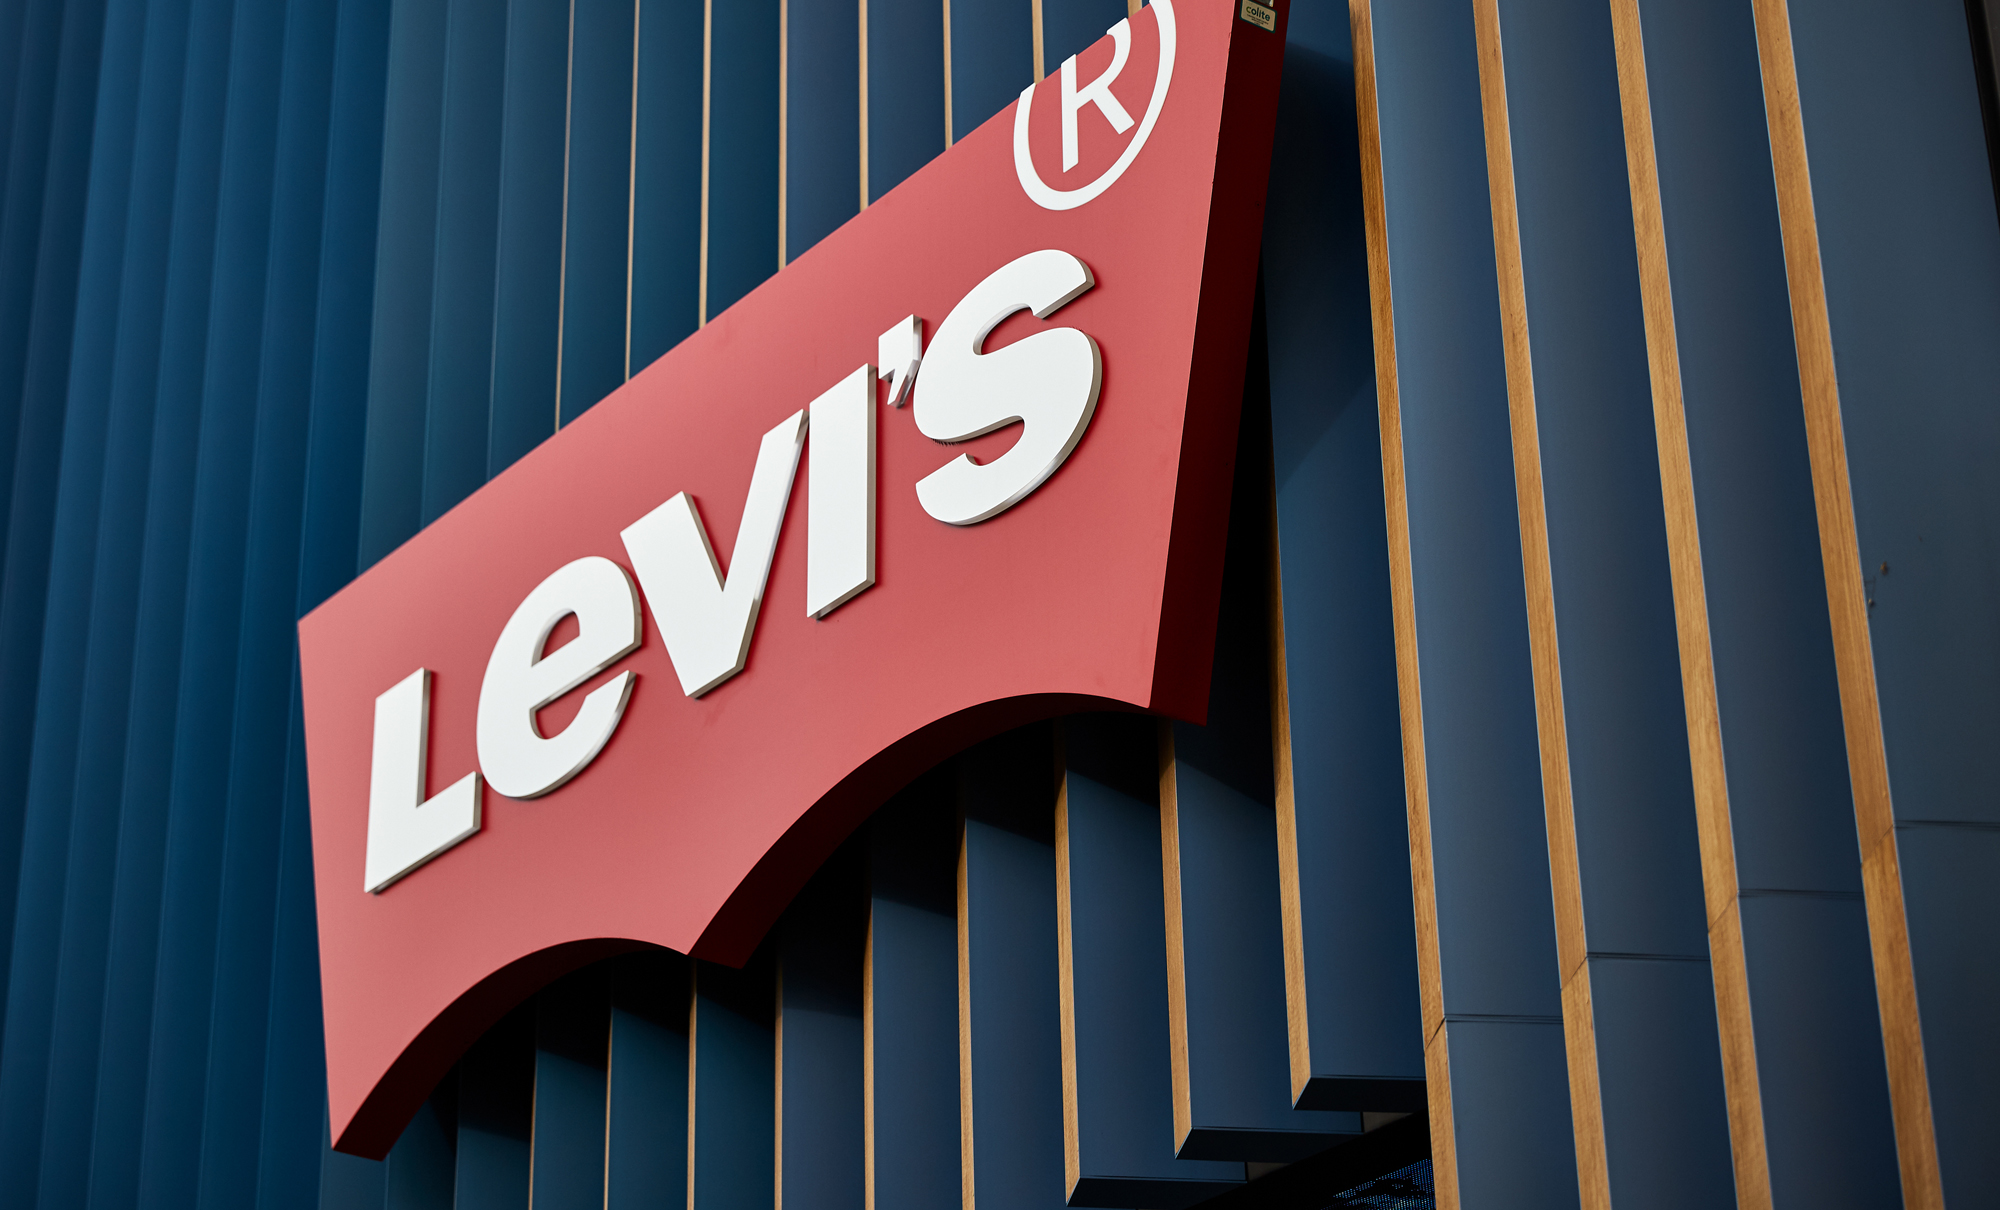 Skinny Jeans Will Never Go Away: Levi's CEO